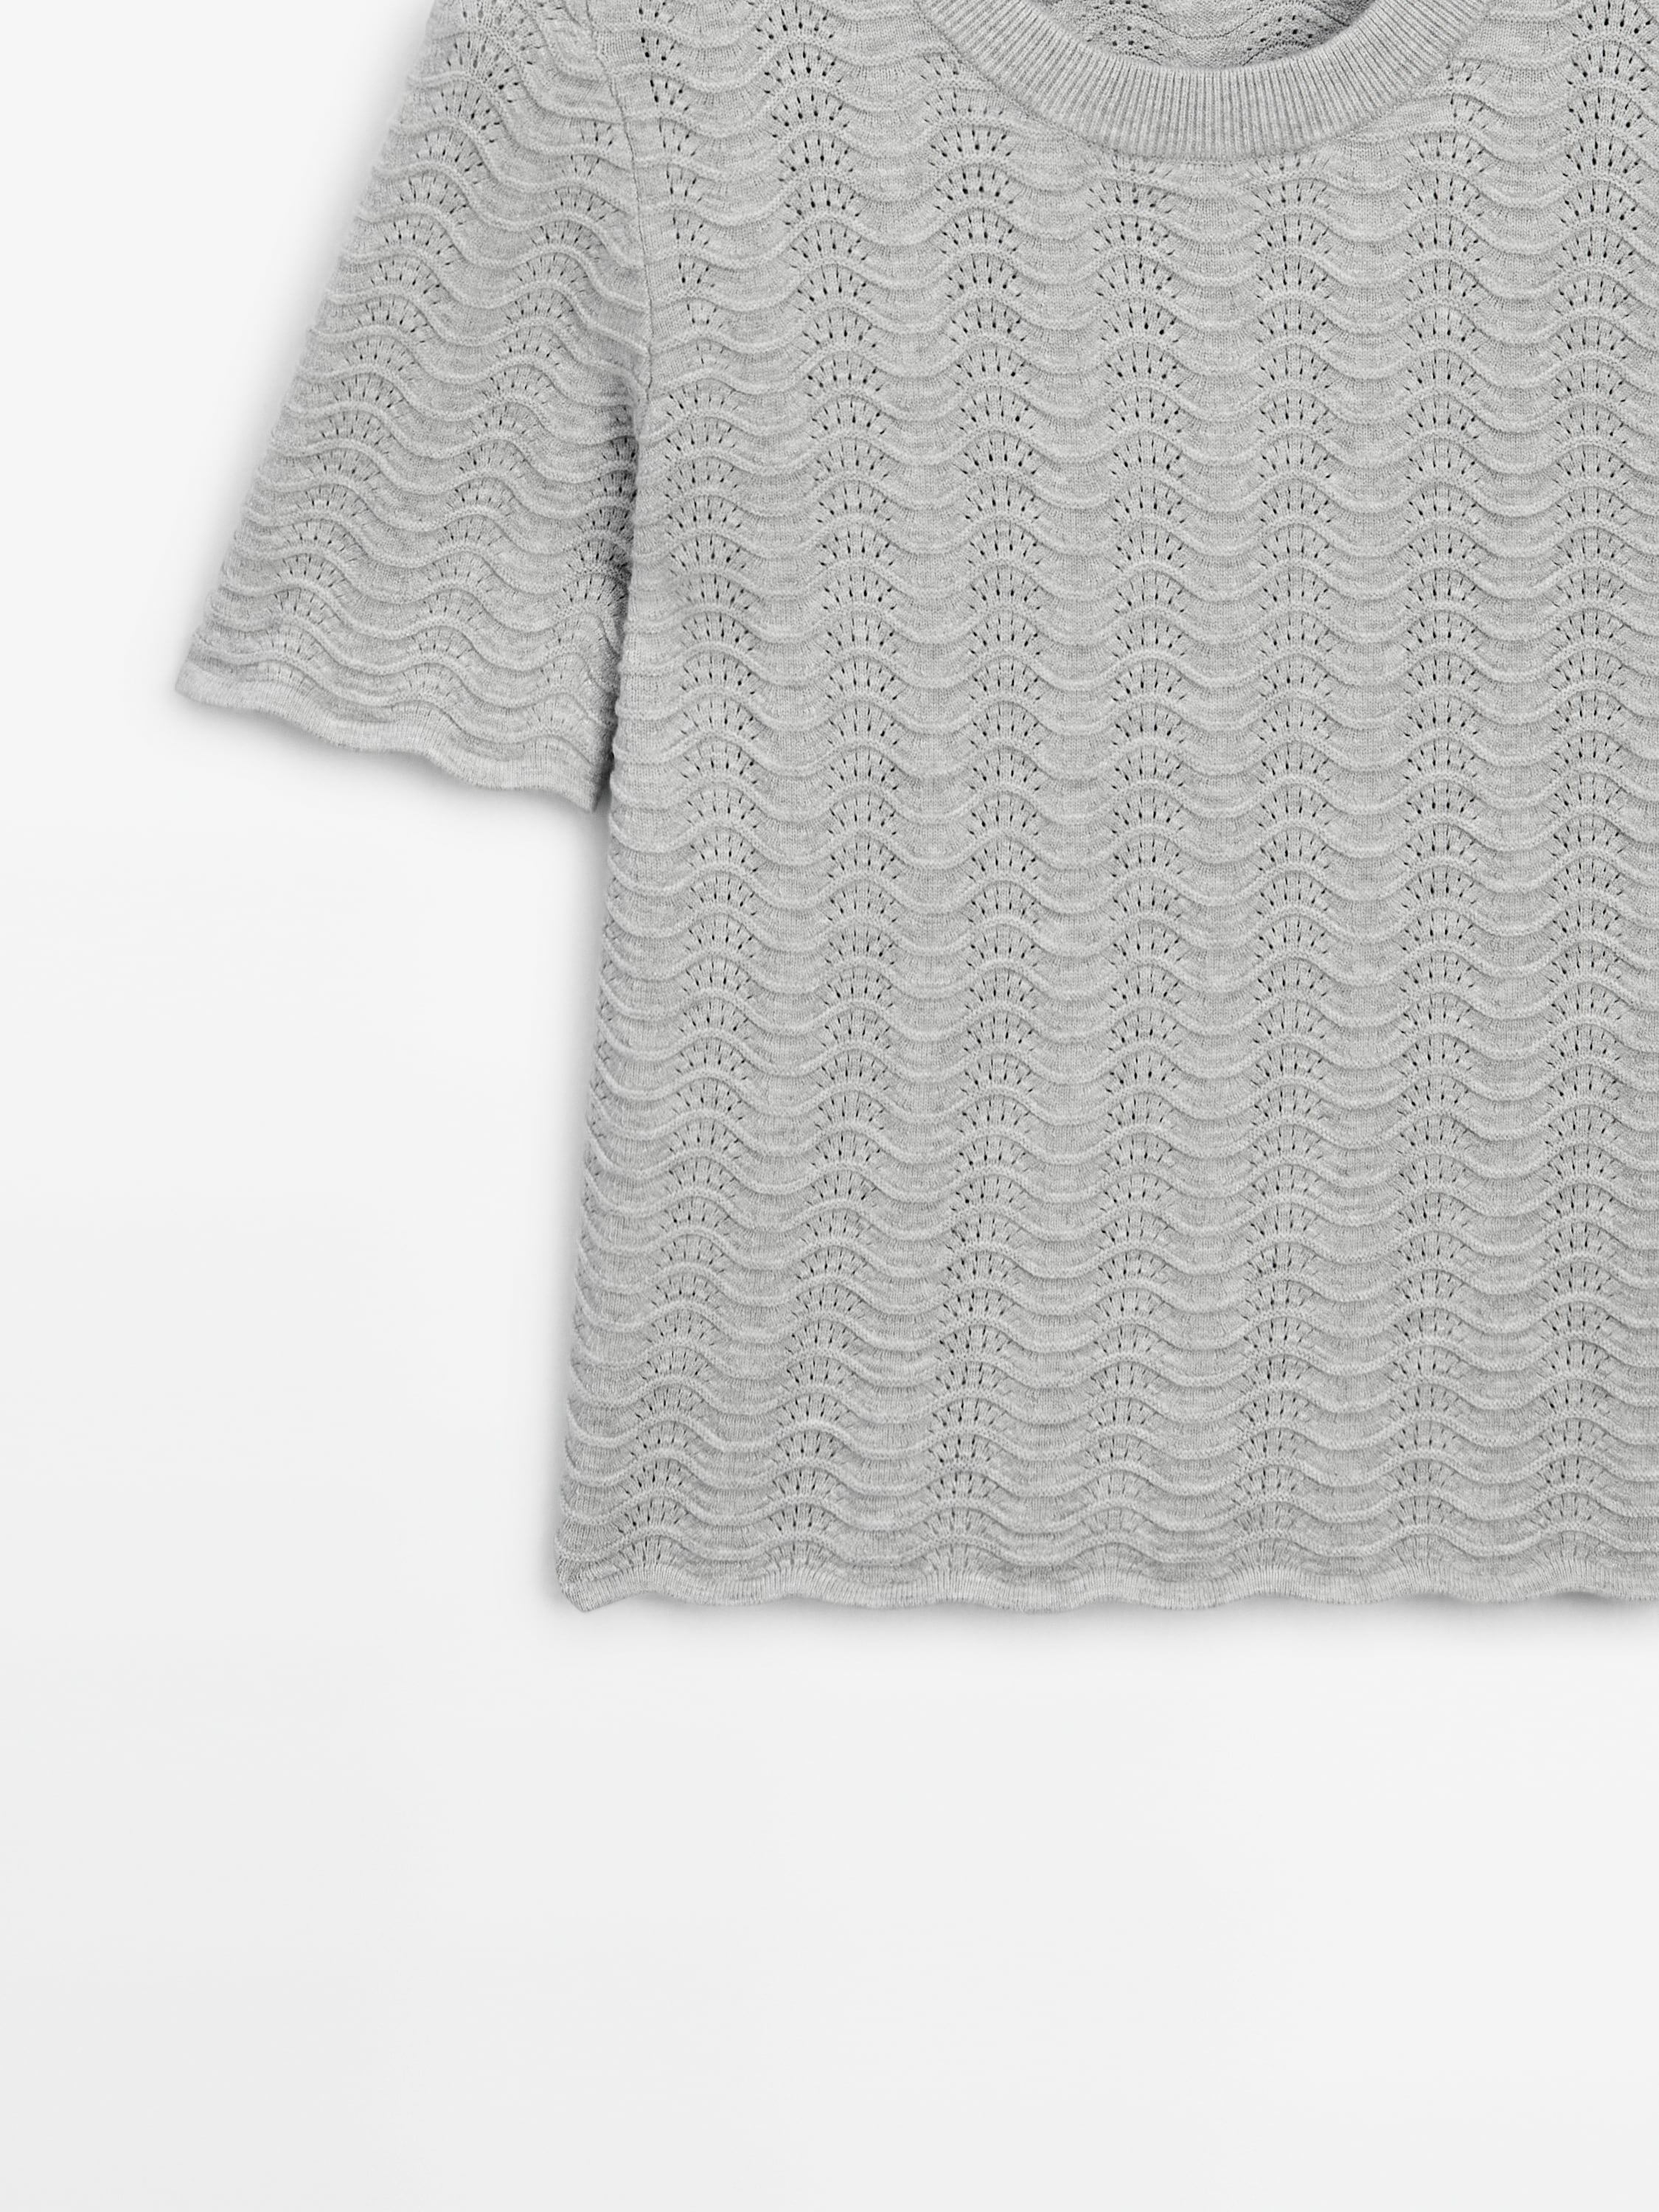 Wavy knit sweater with short sleeves - Studio